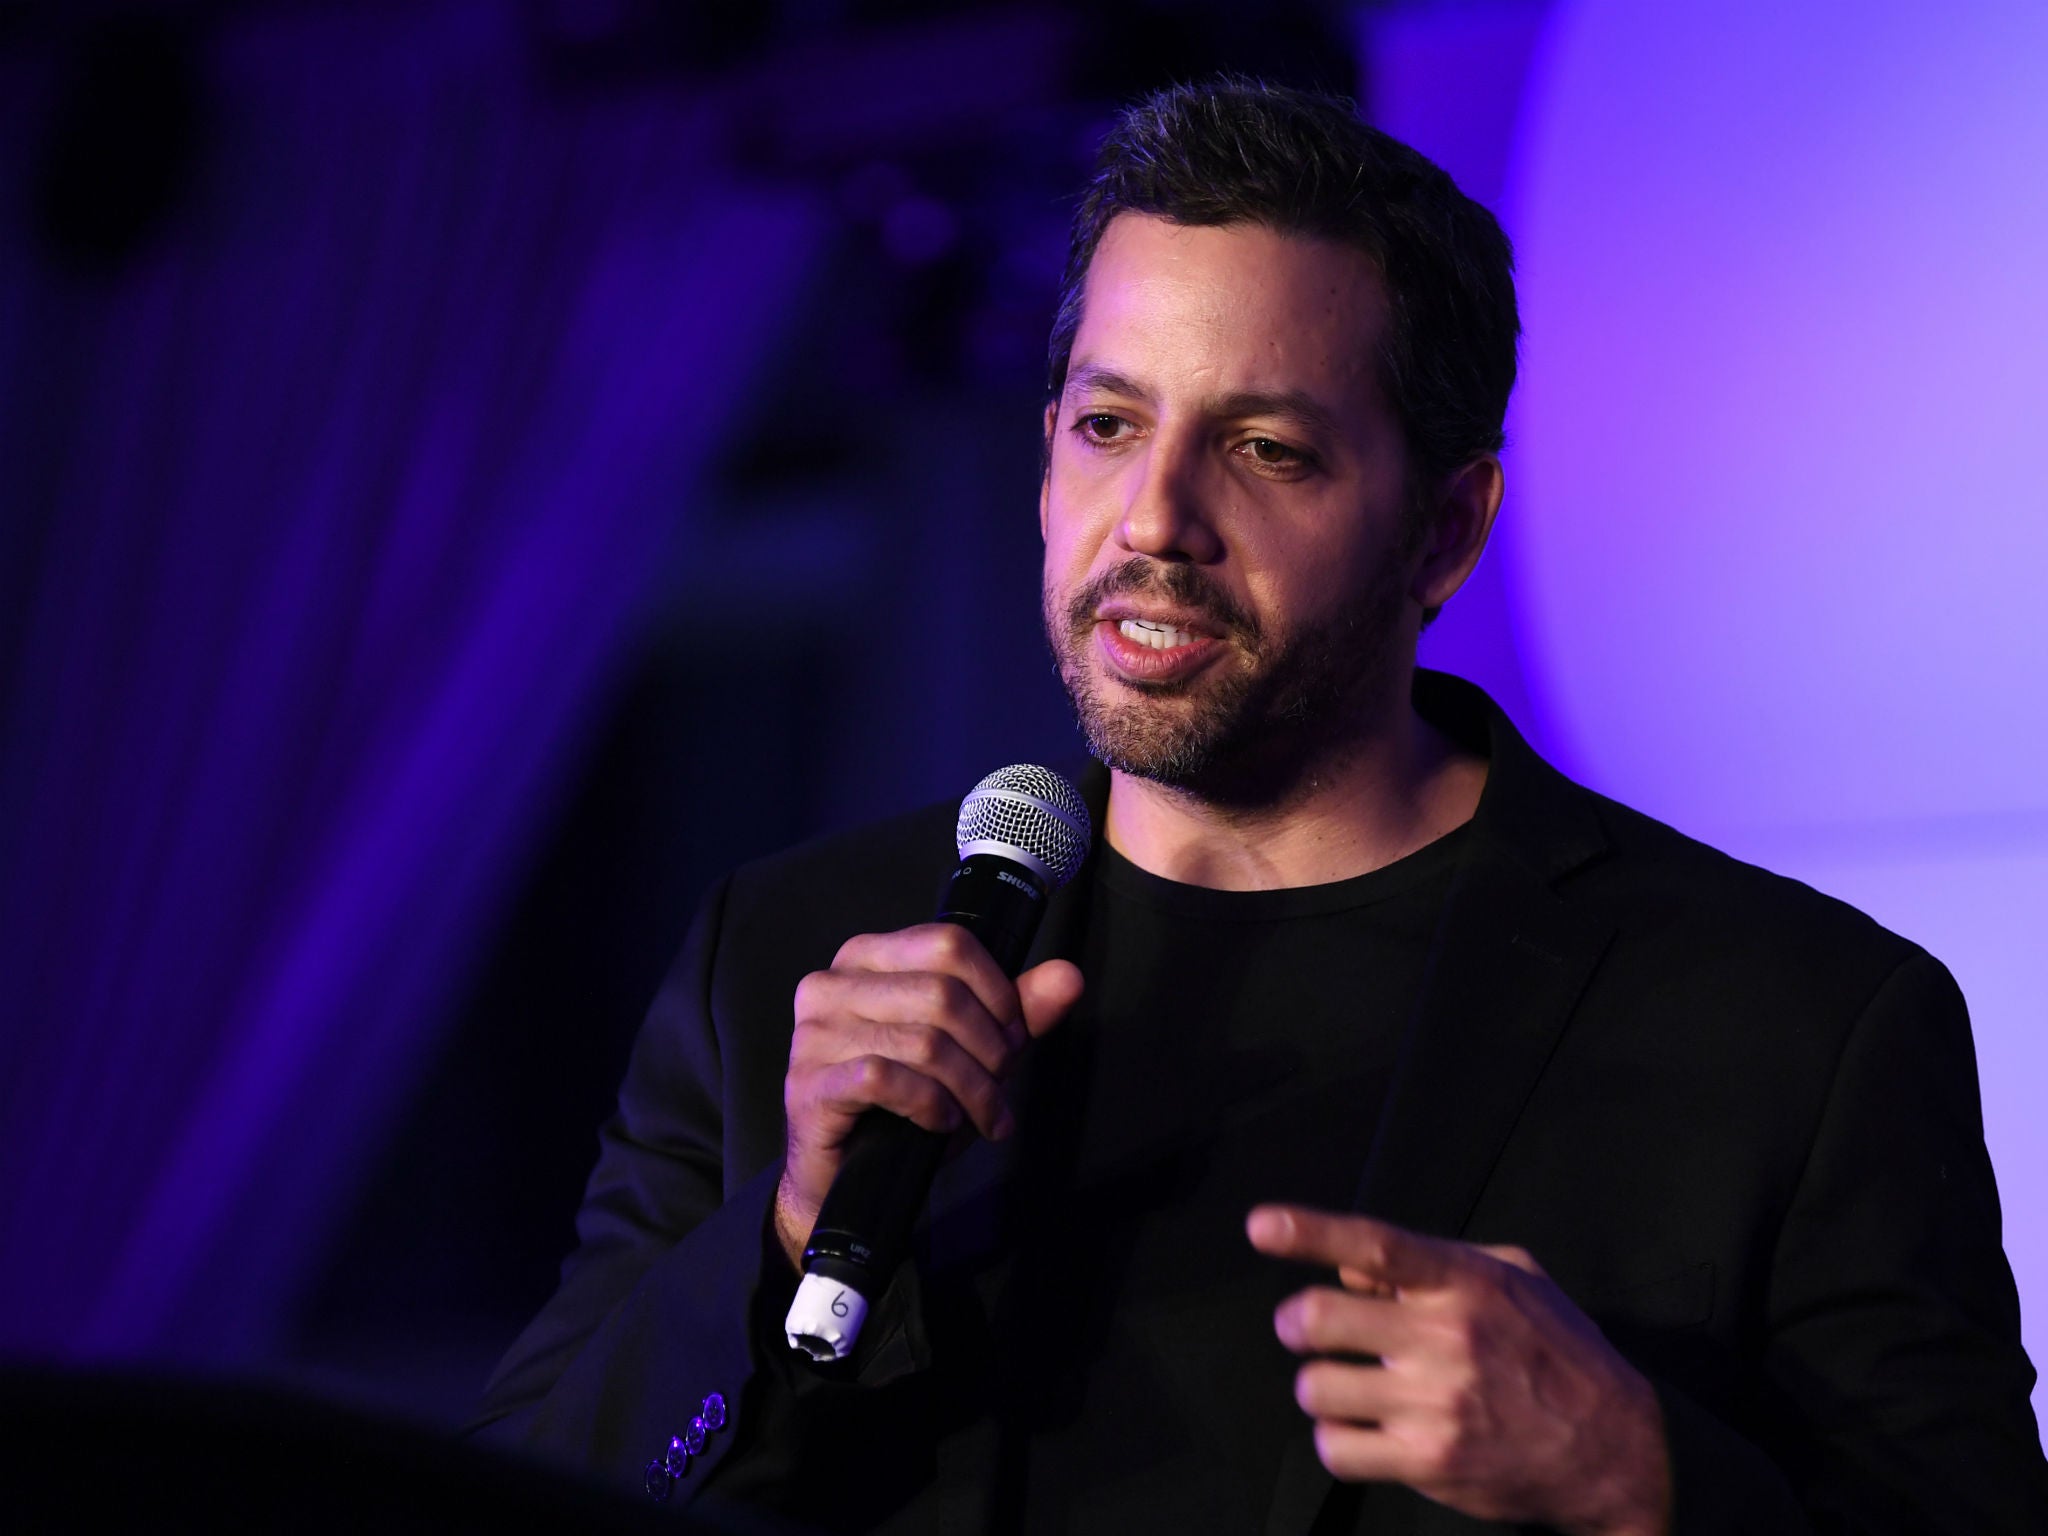 Magician David Blaine has reportedly been accused of two sexual assaults